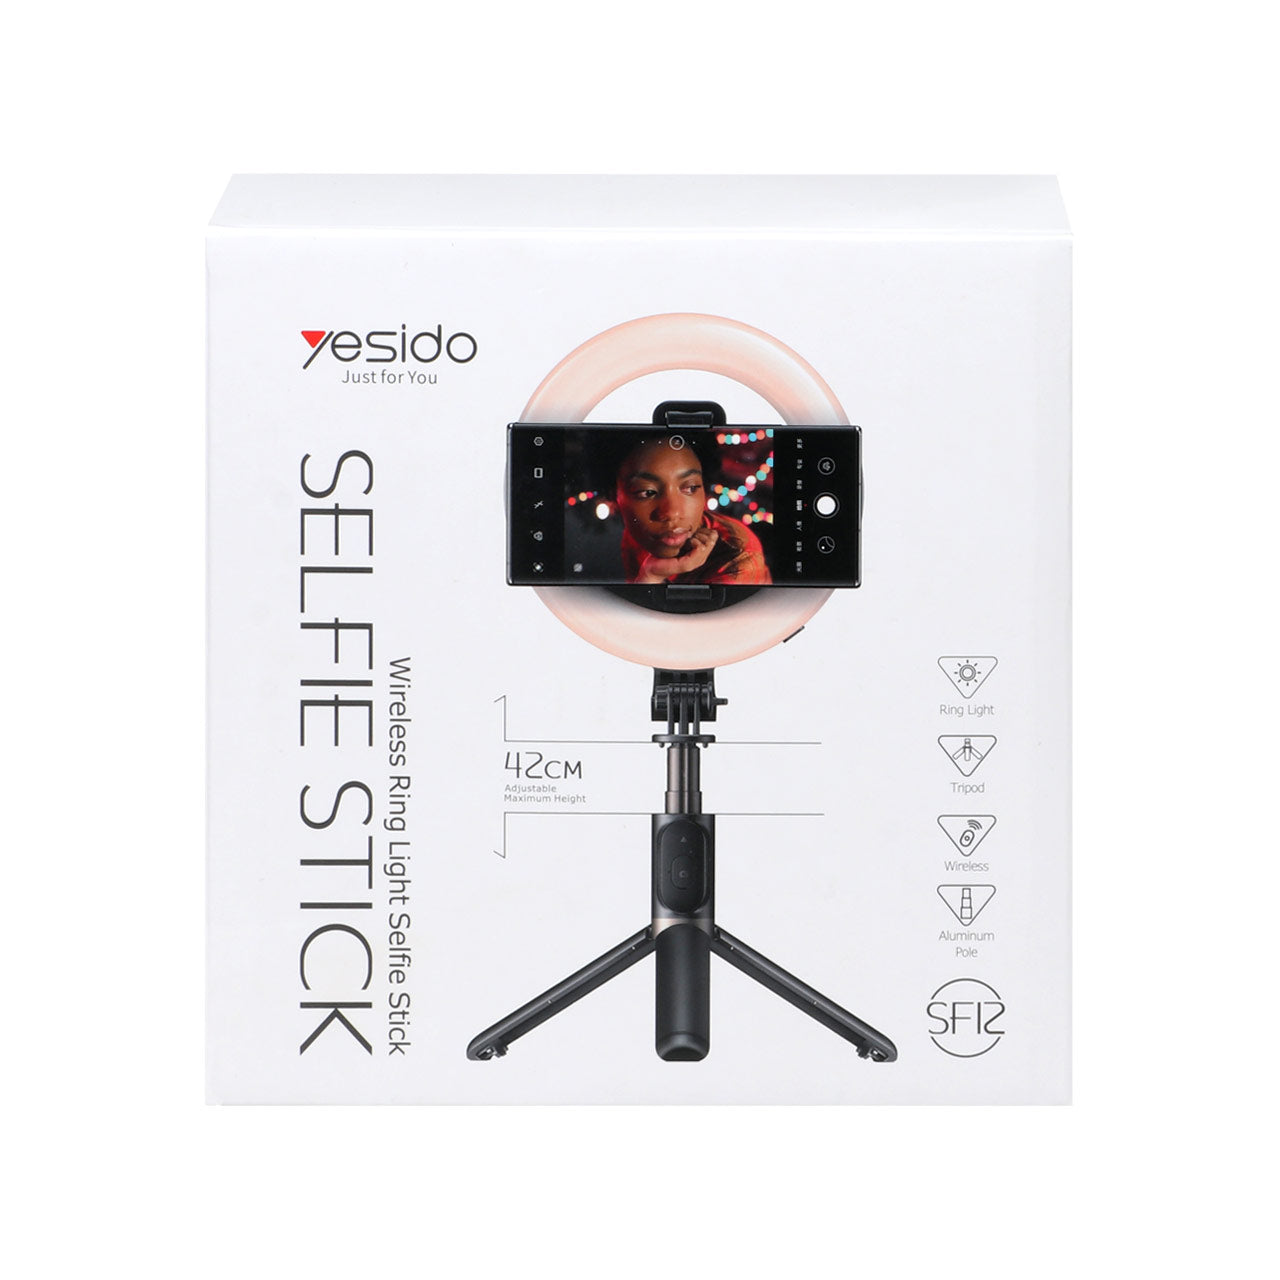 YESIDO SF12 Portable Bluetooth Remote Control Telescopic Phone Holder Tripod Selfie Stick with Ring Fill Light